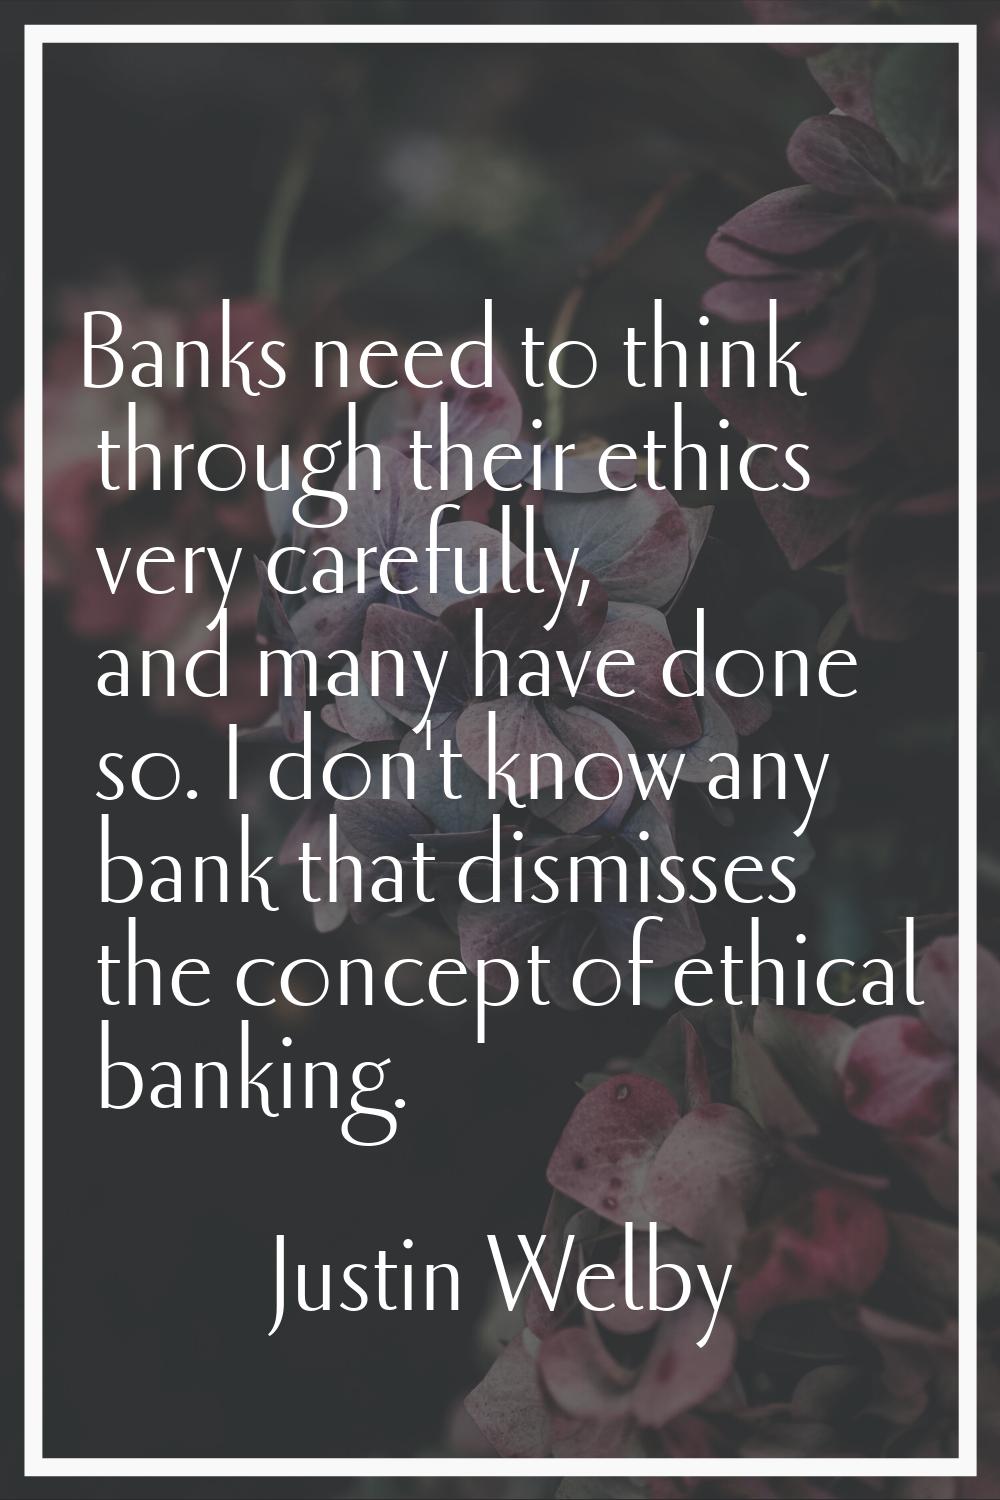 Banks need to think through their ethics very carefully, and many have done so. I don't know any ba